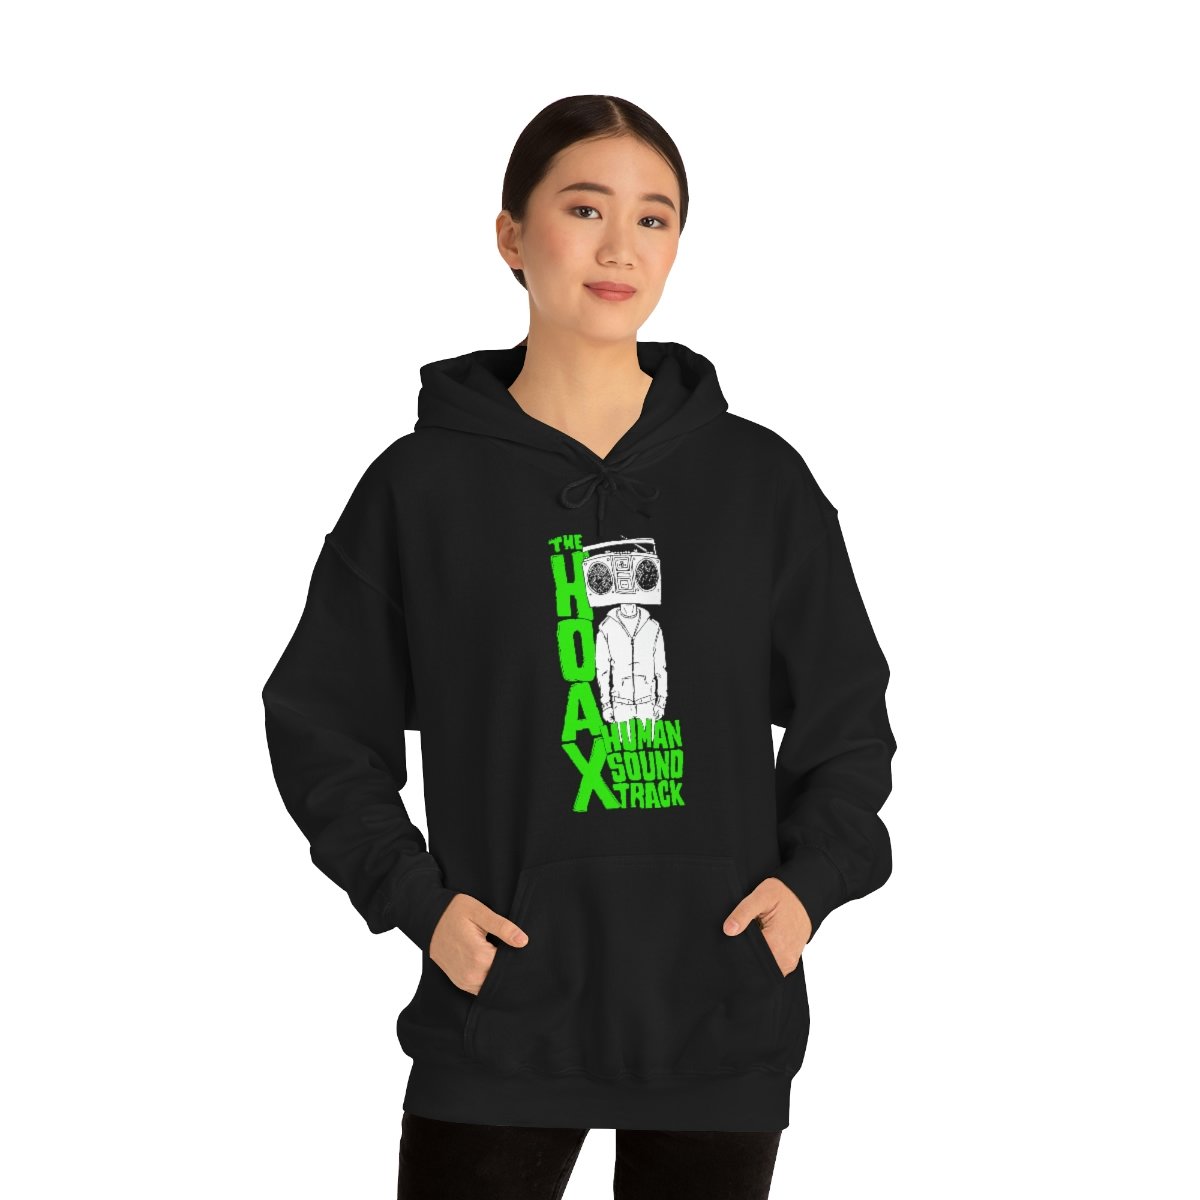 The Hoax – Human Sound Track (TPR) Pullover Hooded Sweatshirt